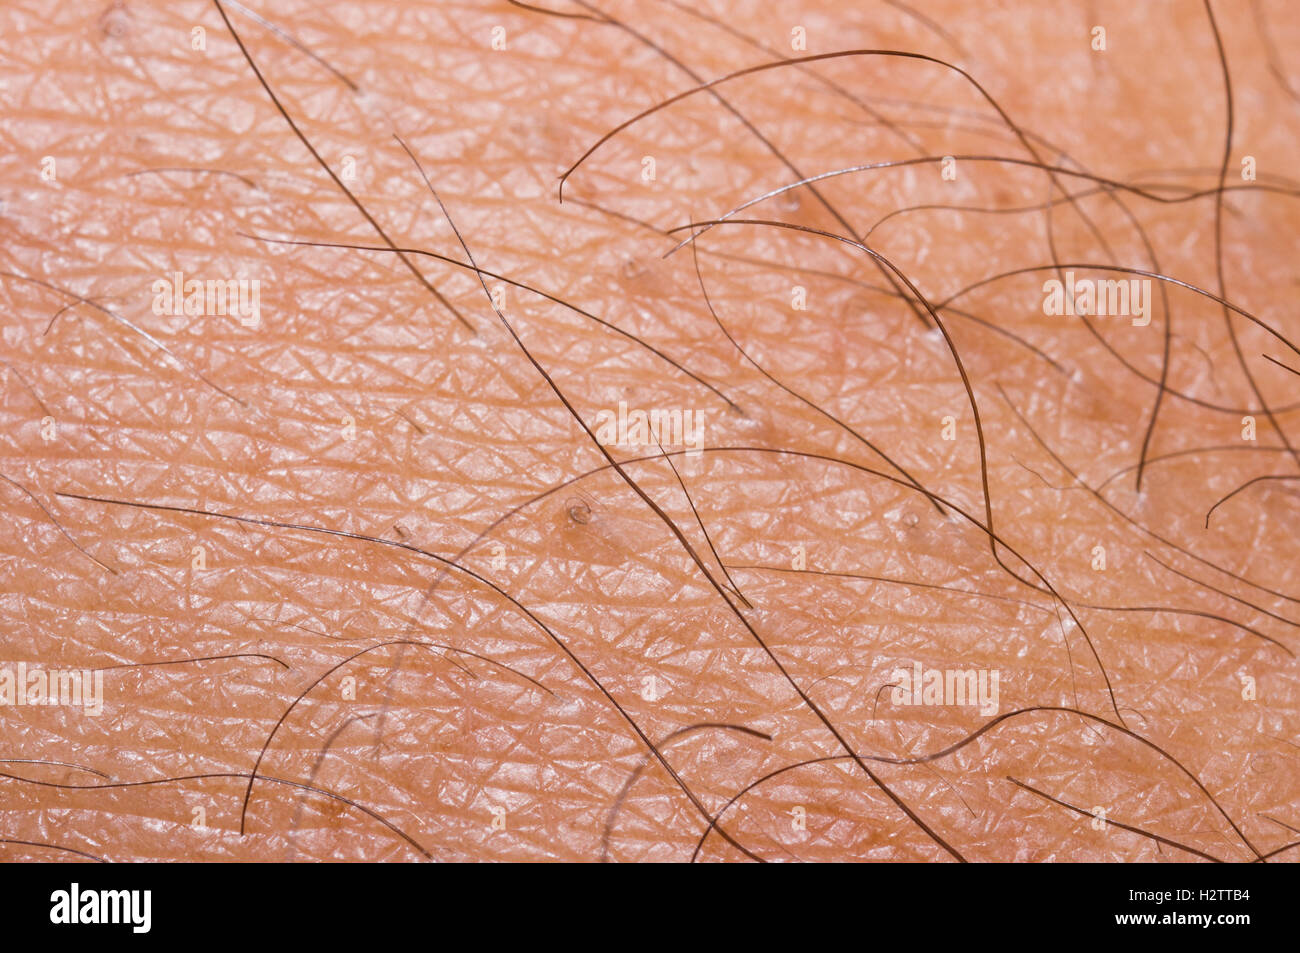 Close up to a male human skin Stock Photo